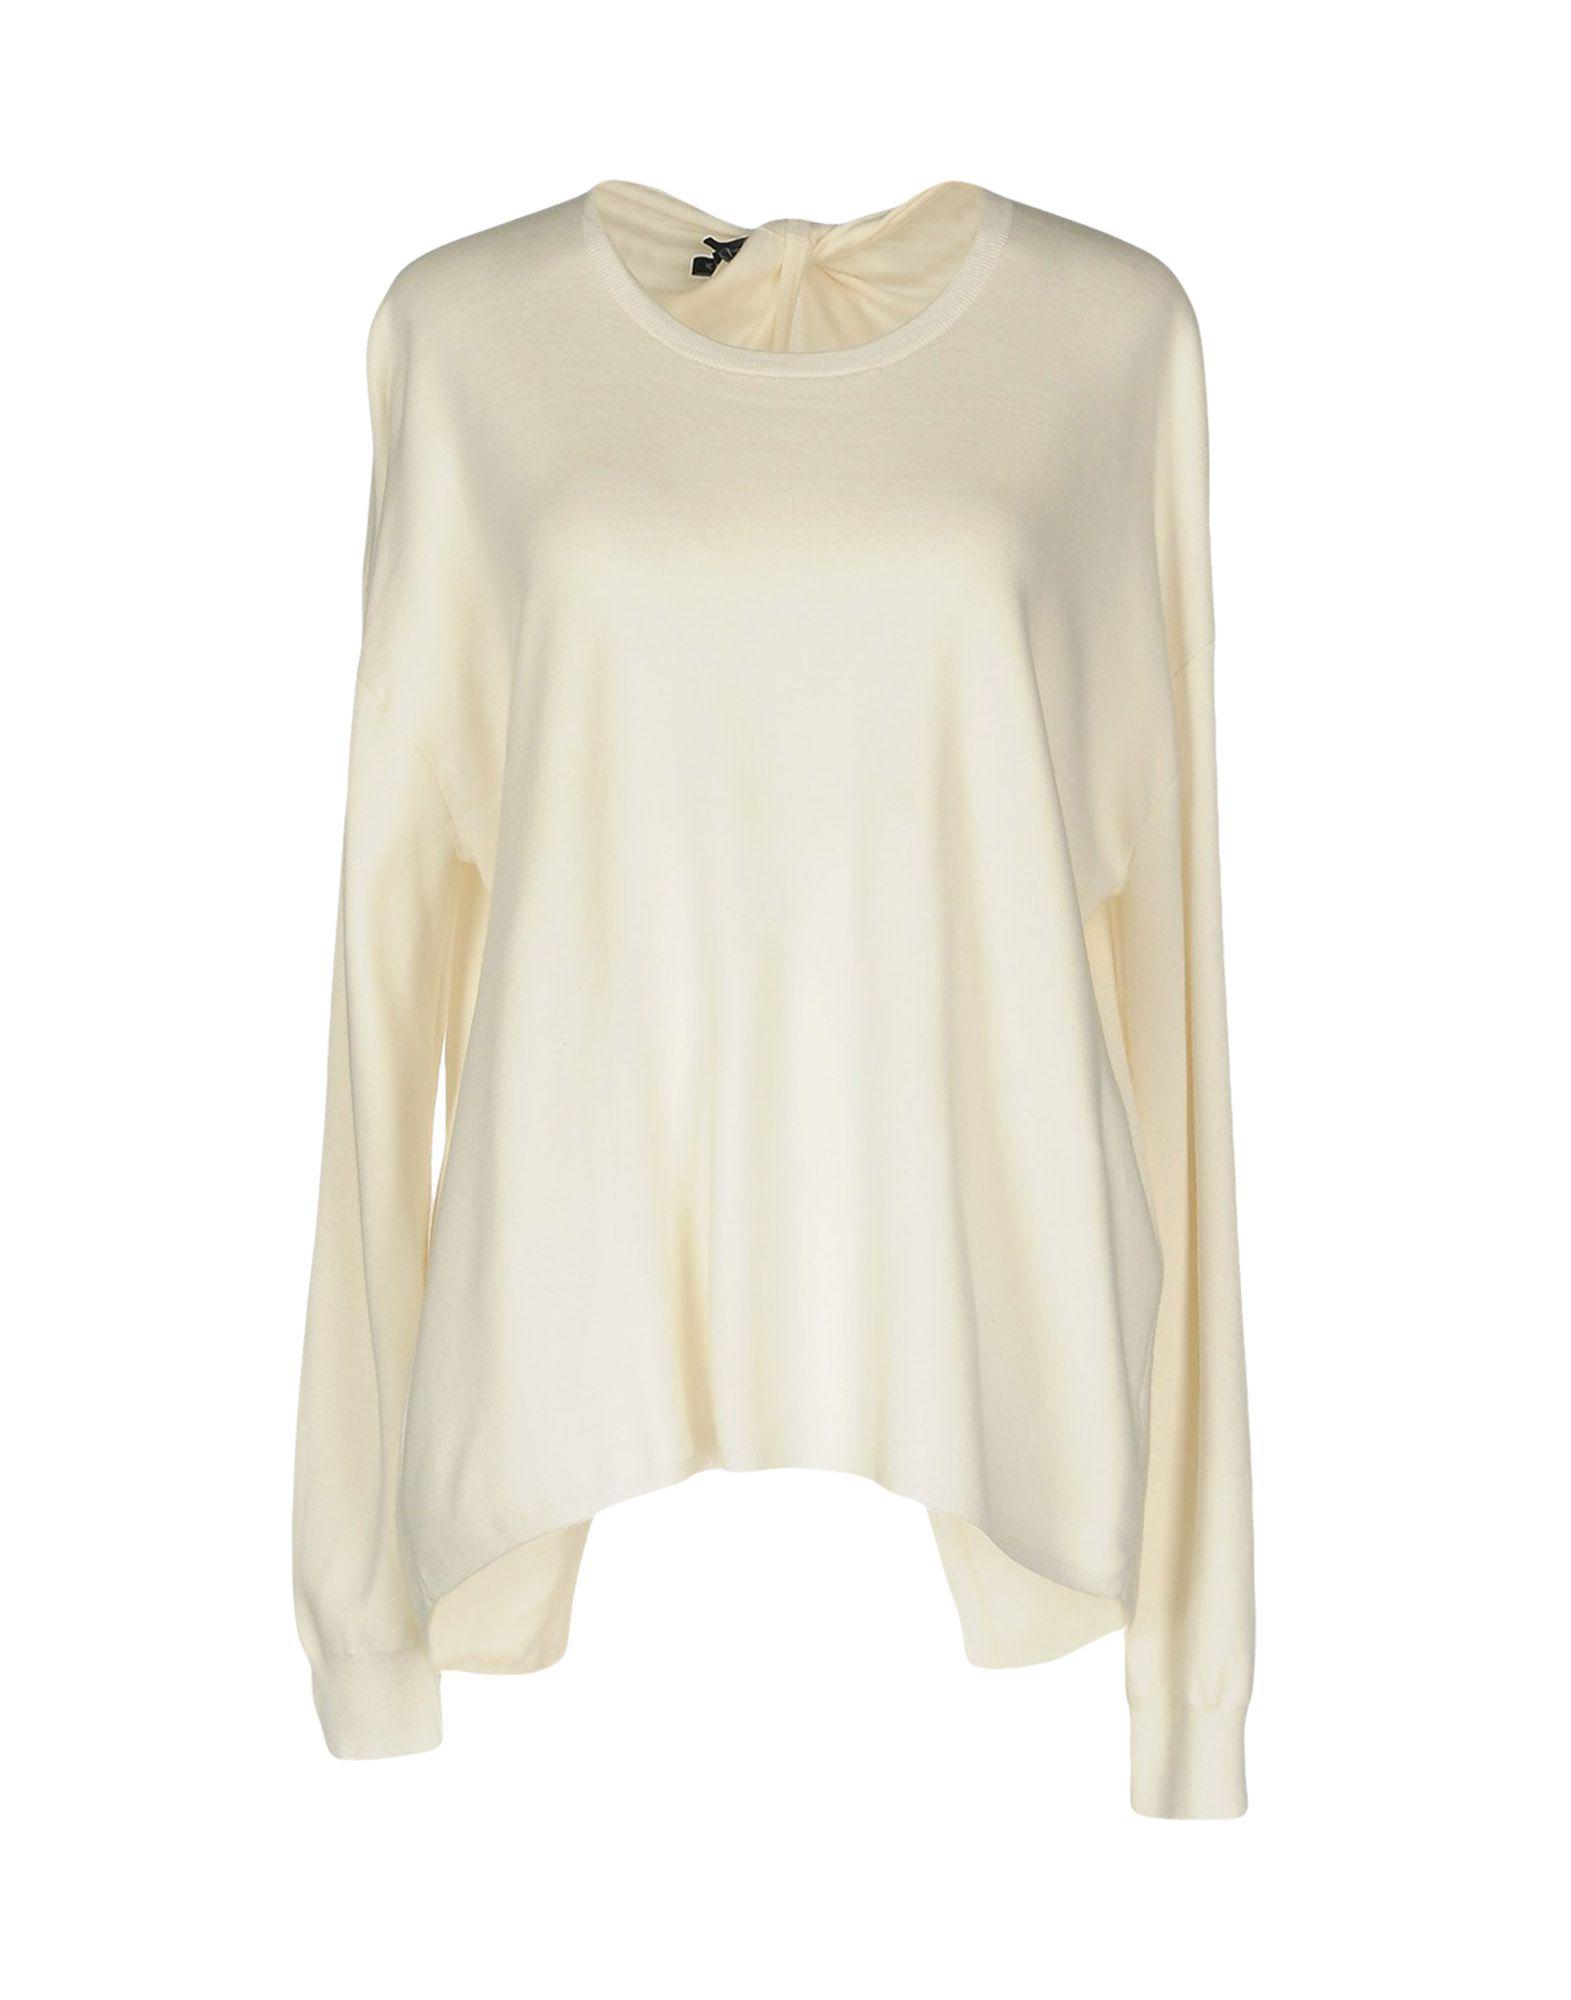 Theory Wool Sweater in Ivory (White) - Lyst